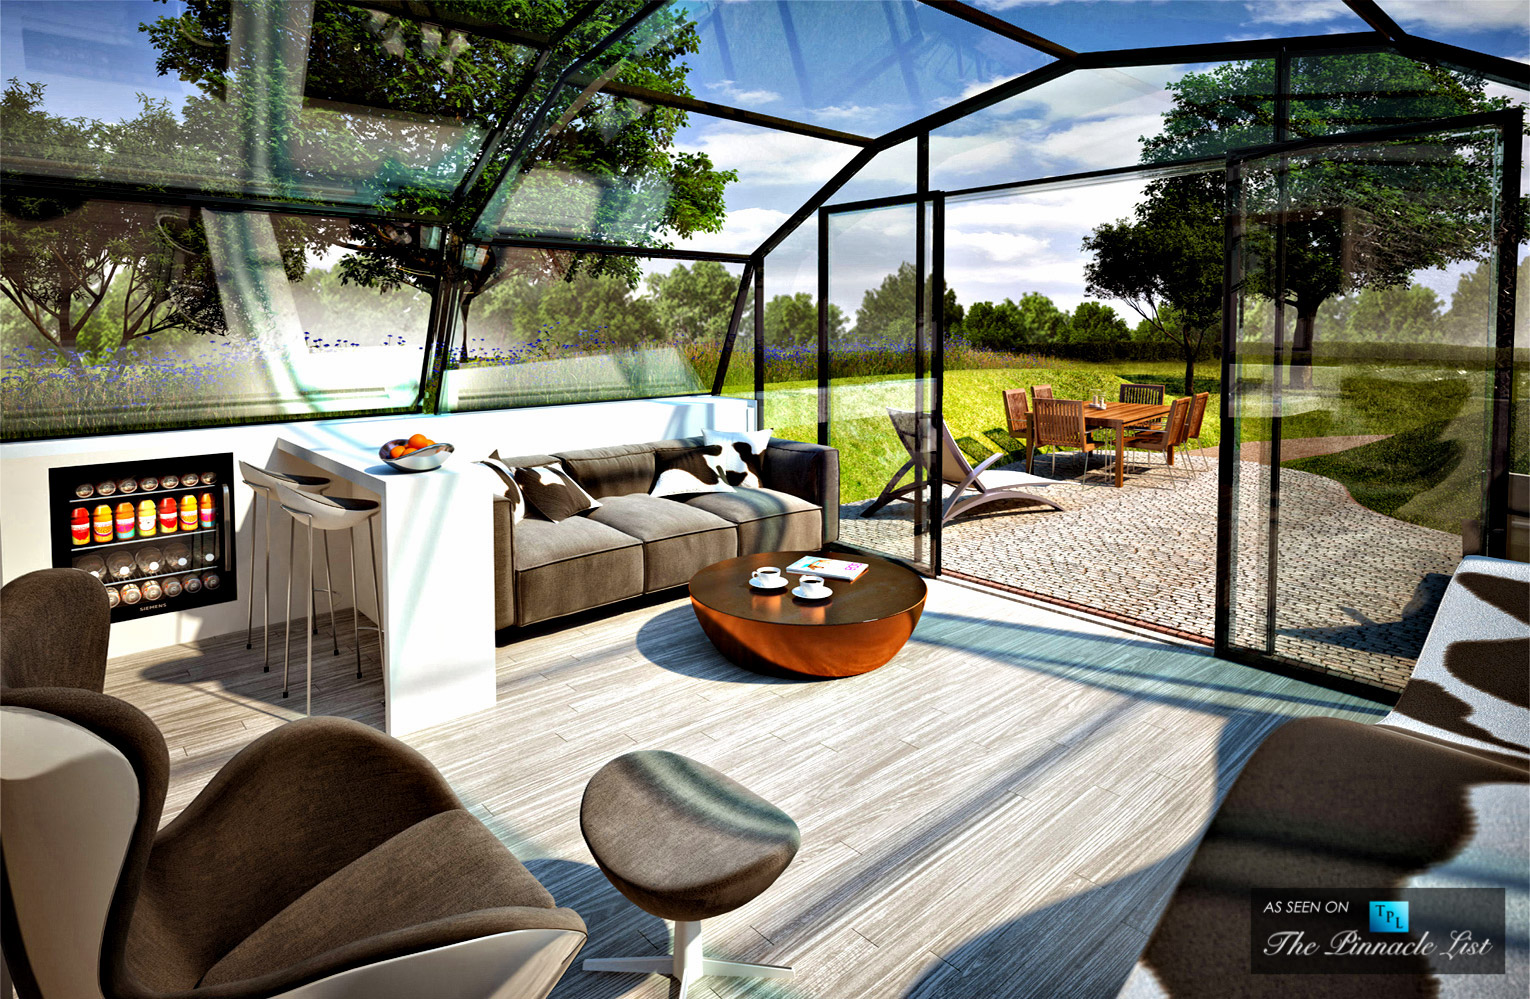 The Photon Space – Imagining an All-Glass Modular Home, Controllable with an iPhone